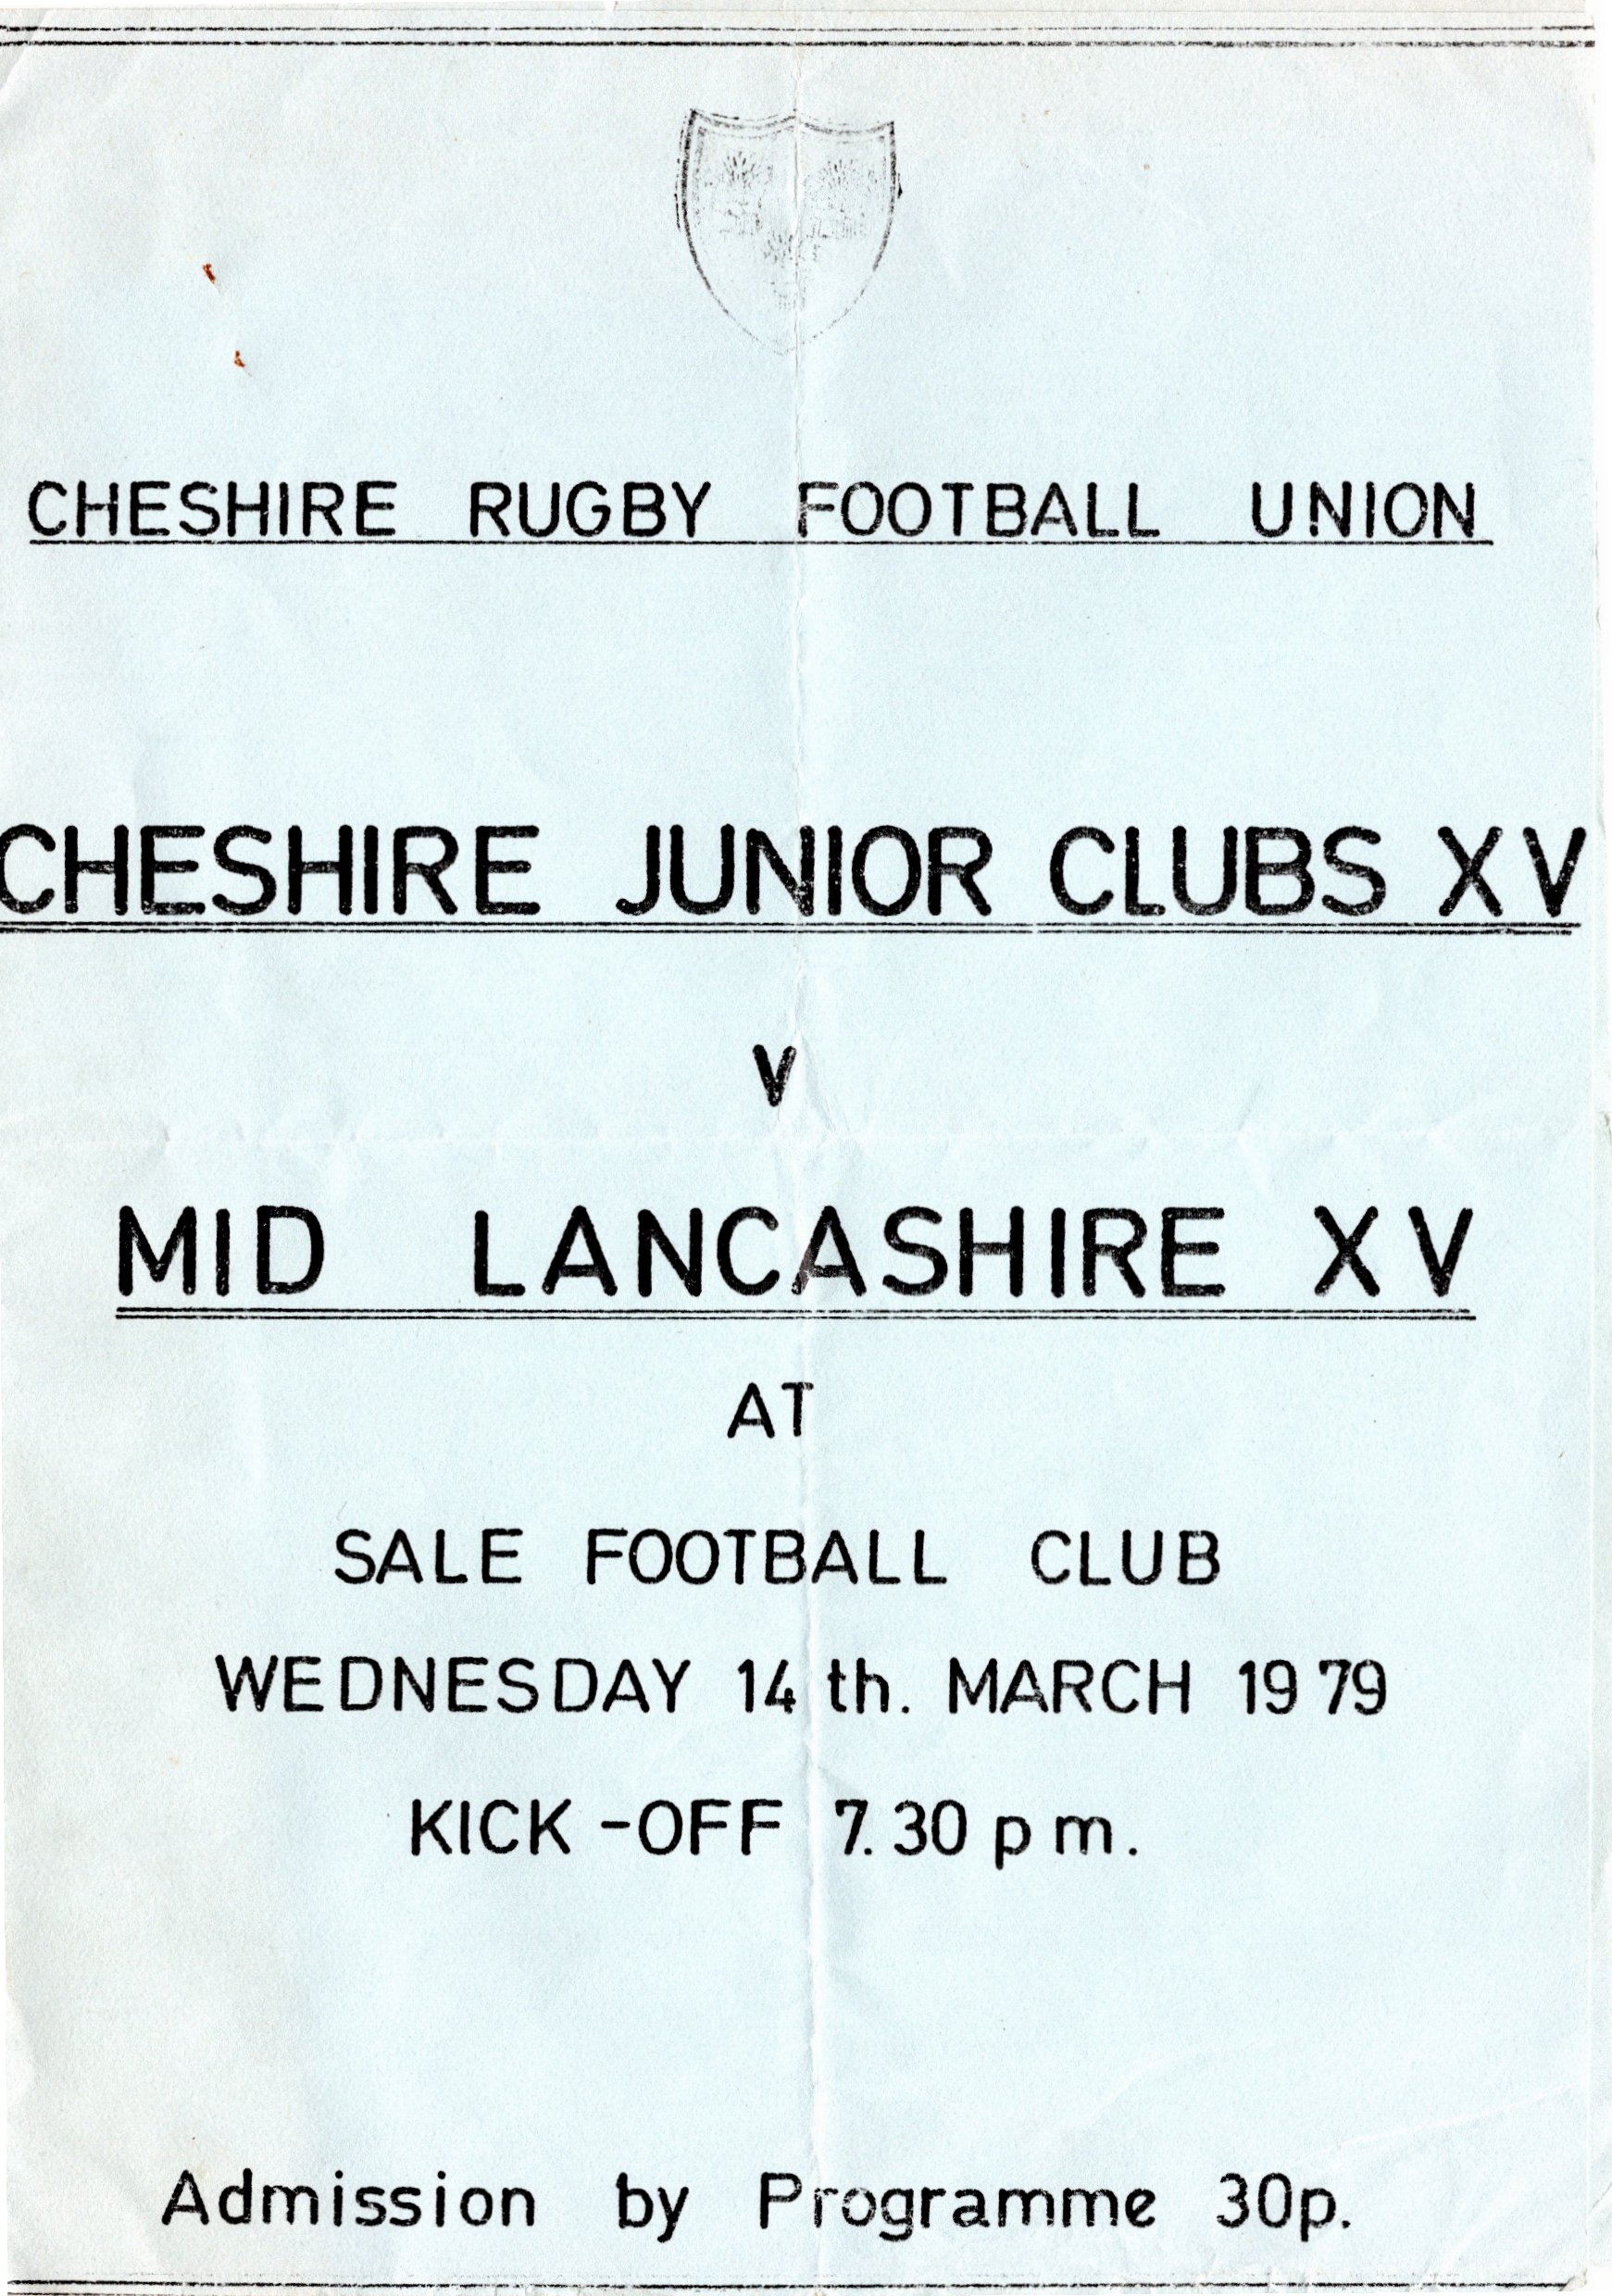 Photograph Old Instonians RUFC, 1979 Cheshire RFU, Cheshire Junior Clubs v Mid Lancs